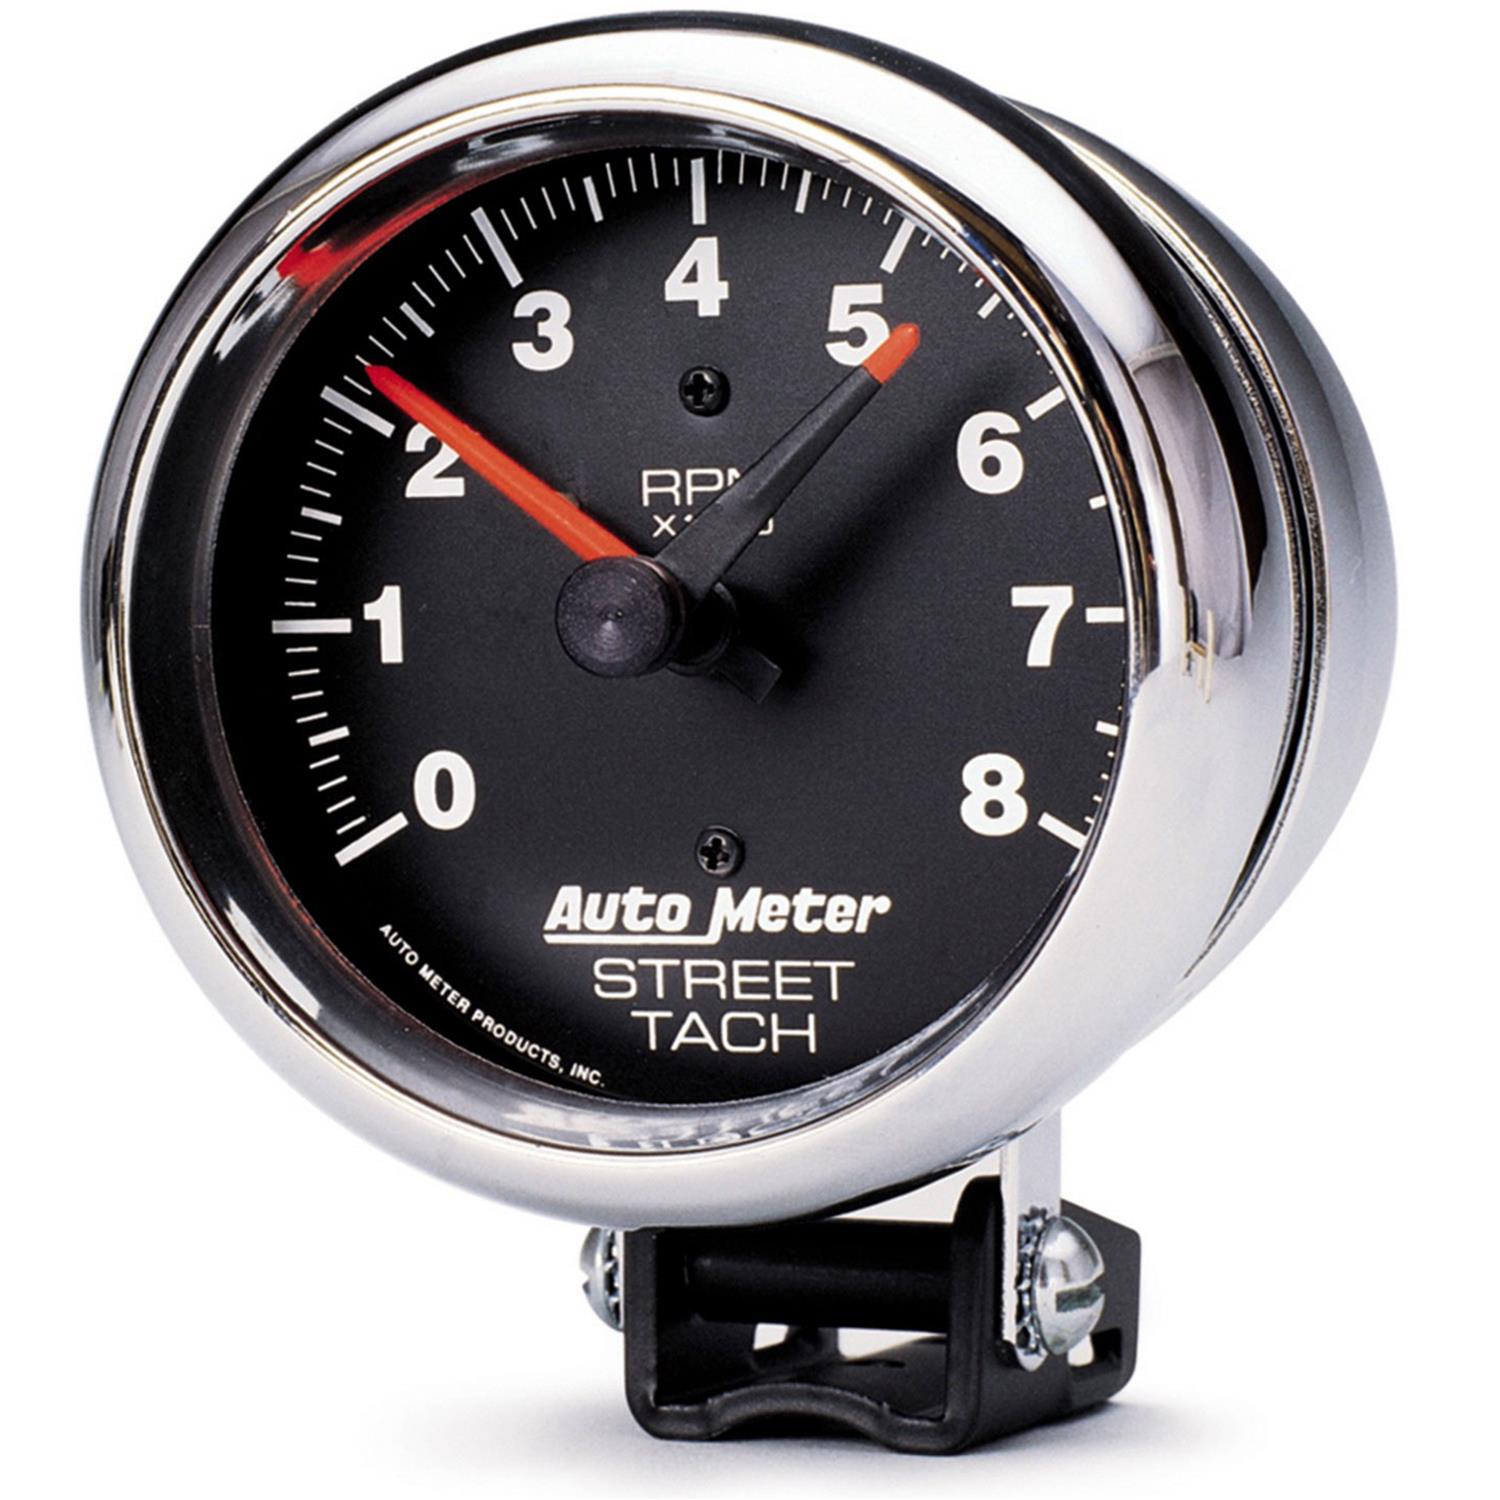 Why Is My Tachometer Needle Dancing Up and Down? - ER autocare